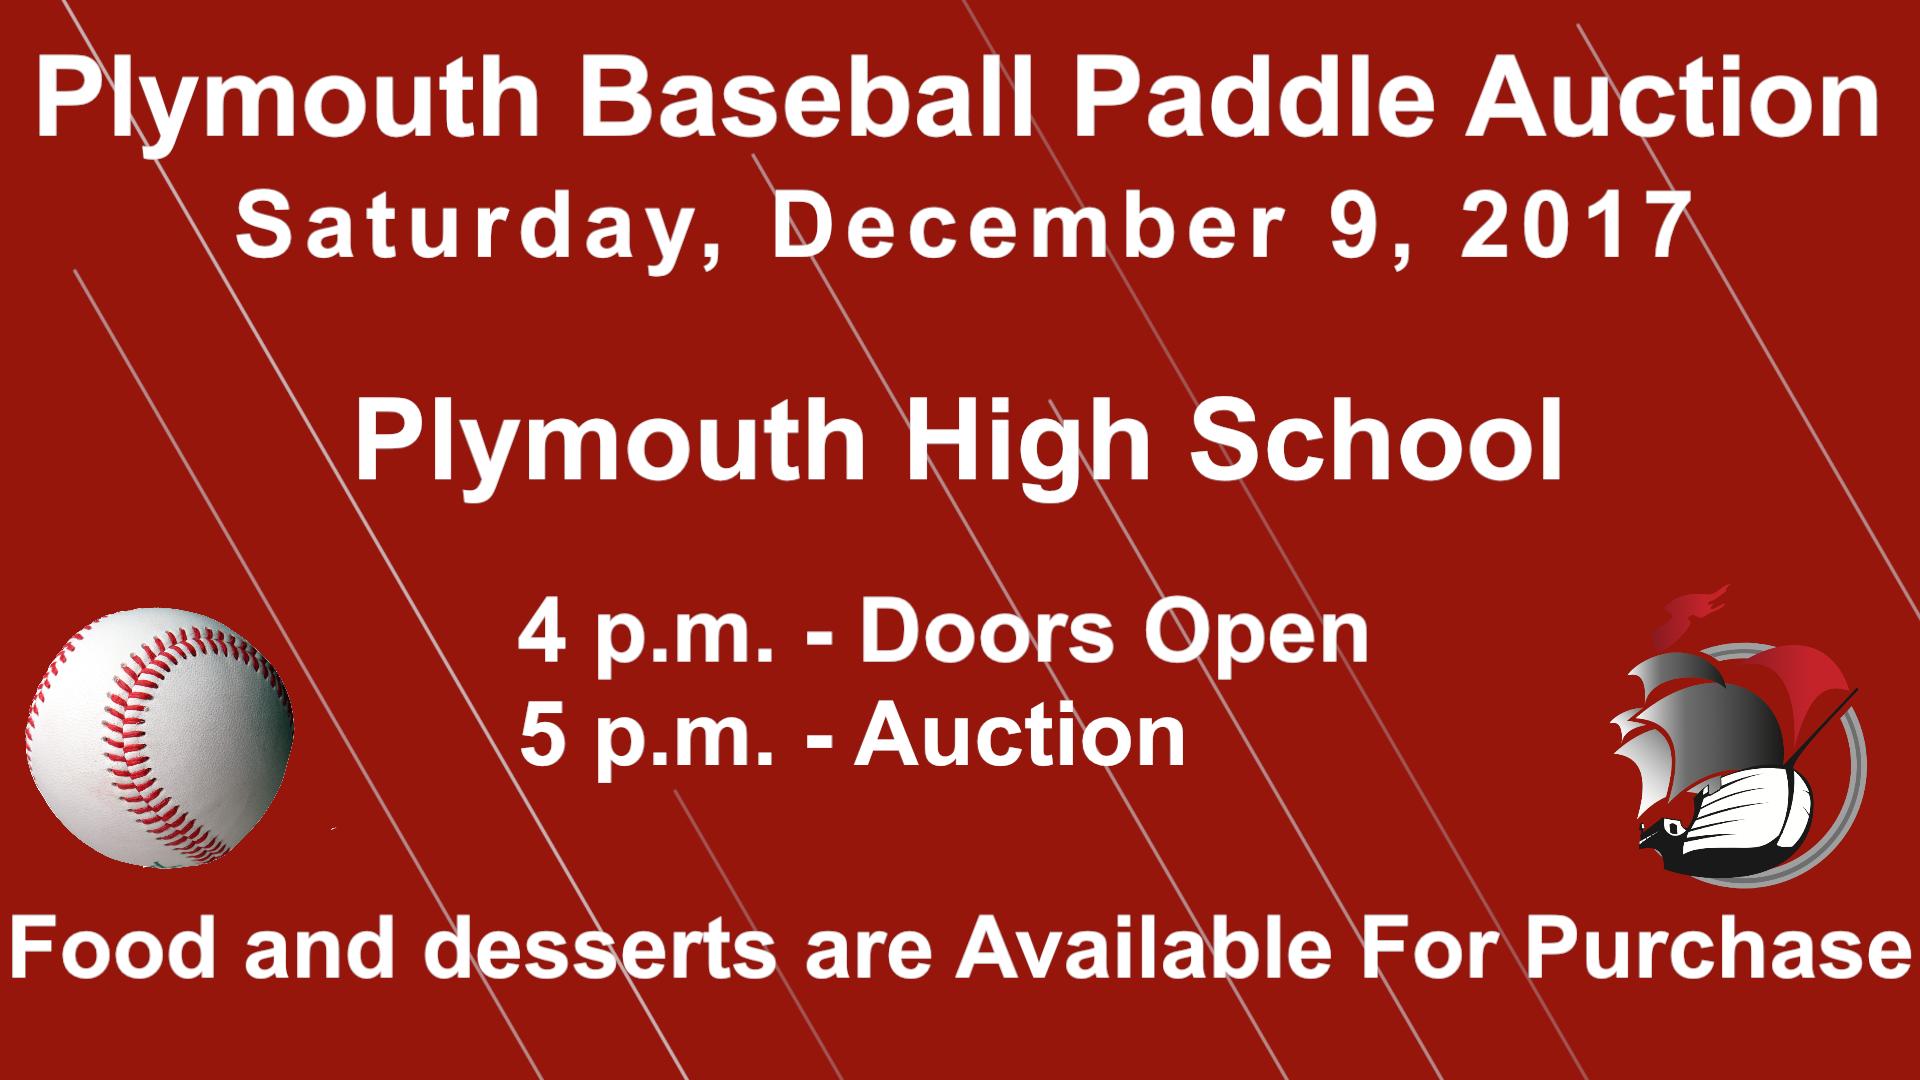 Plymouth Baseball Paddle Auction Saturday, December 9, 2017